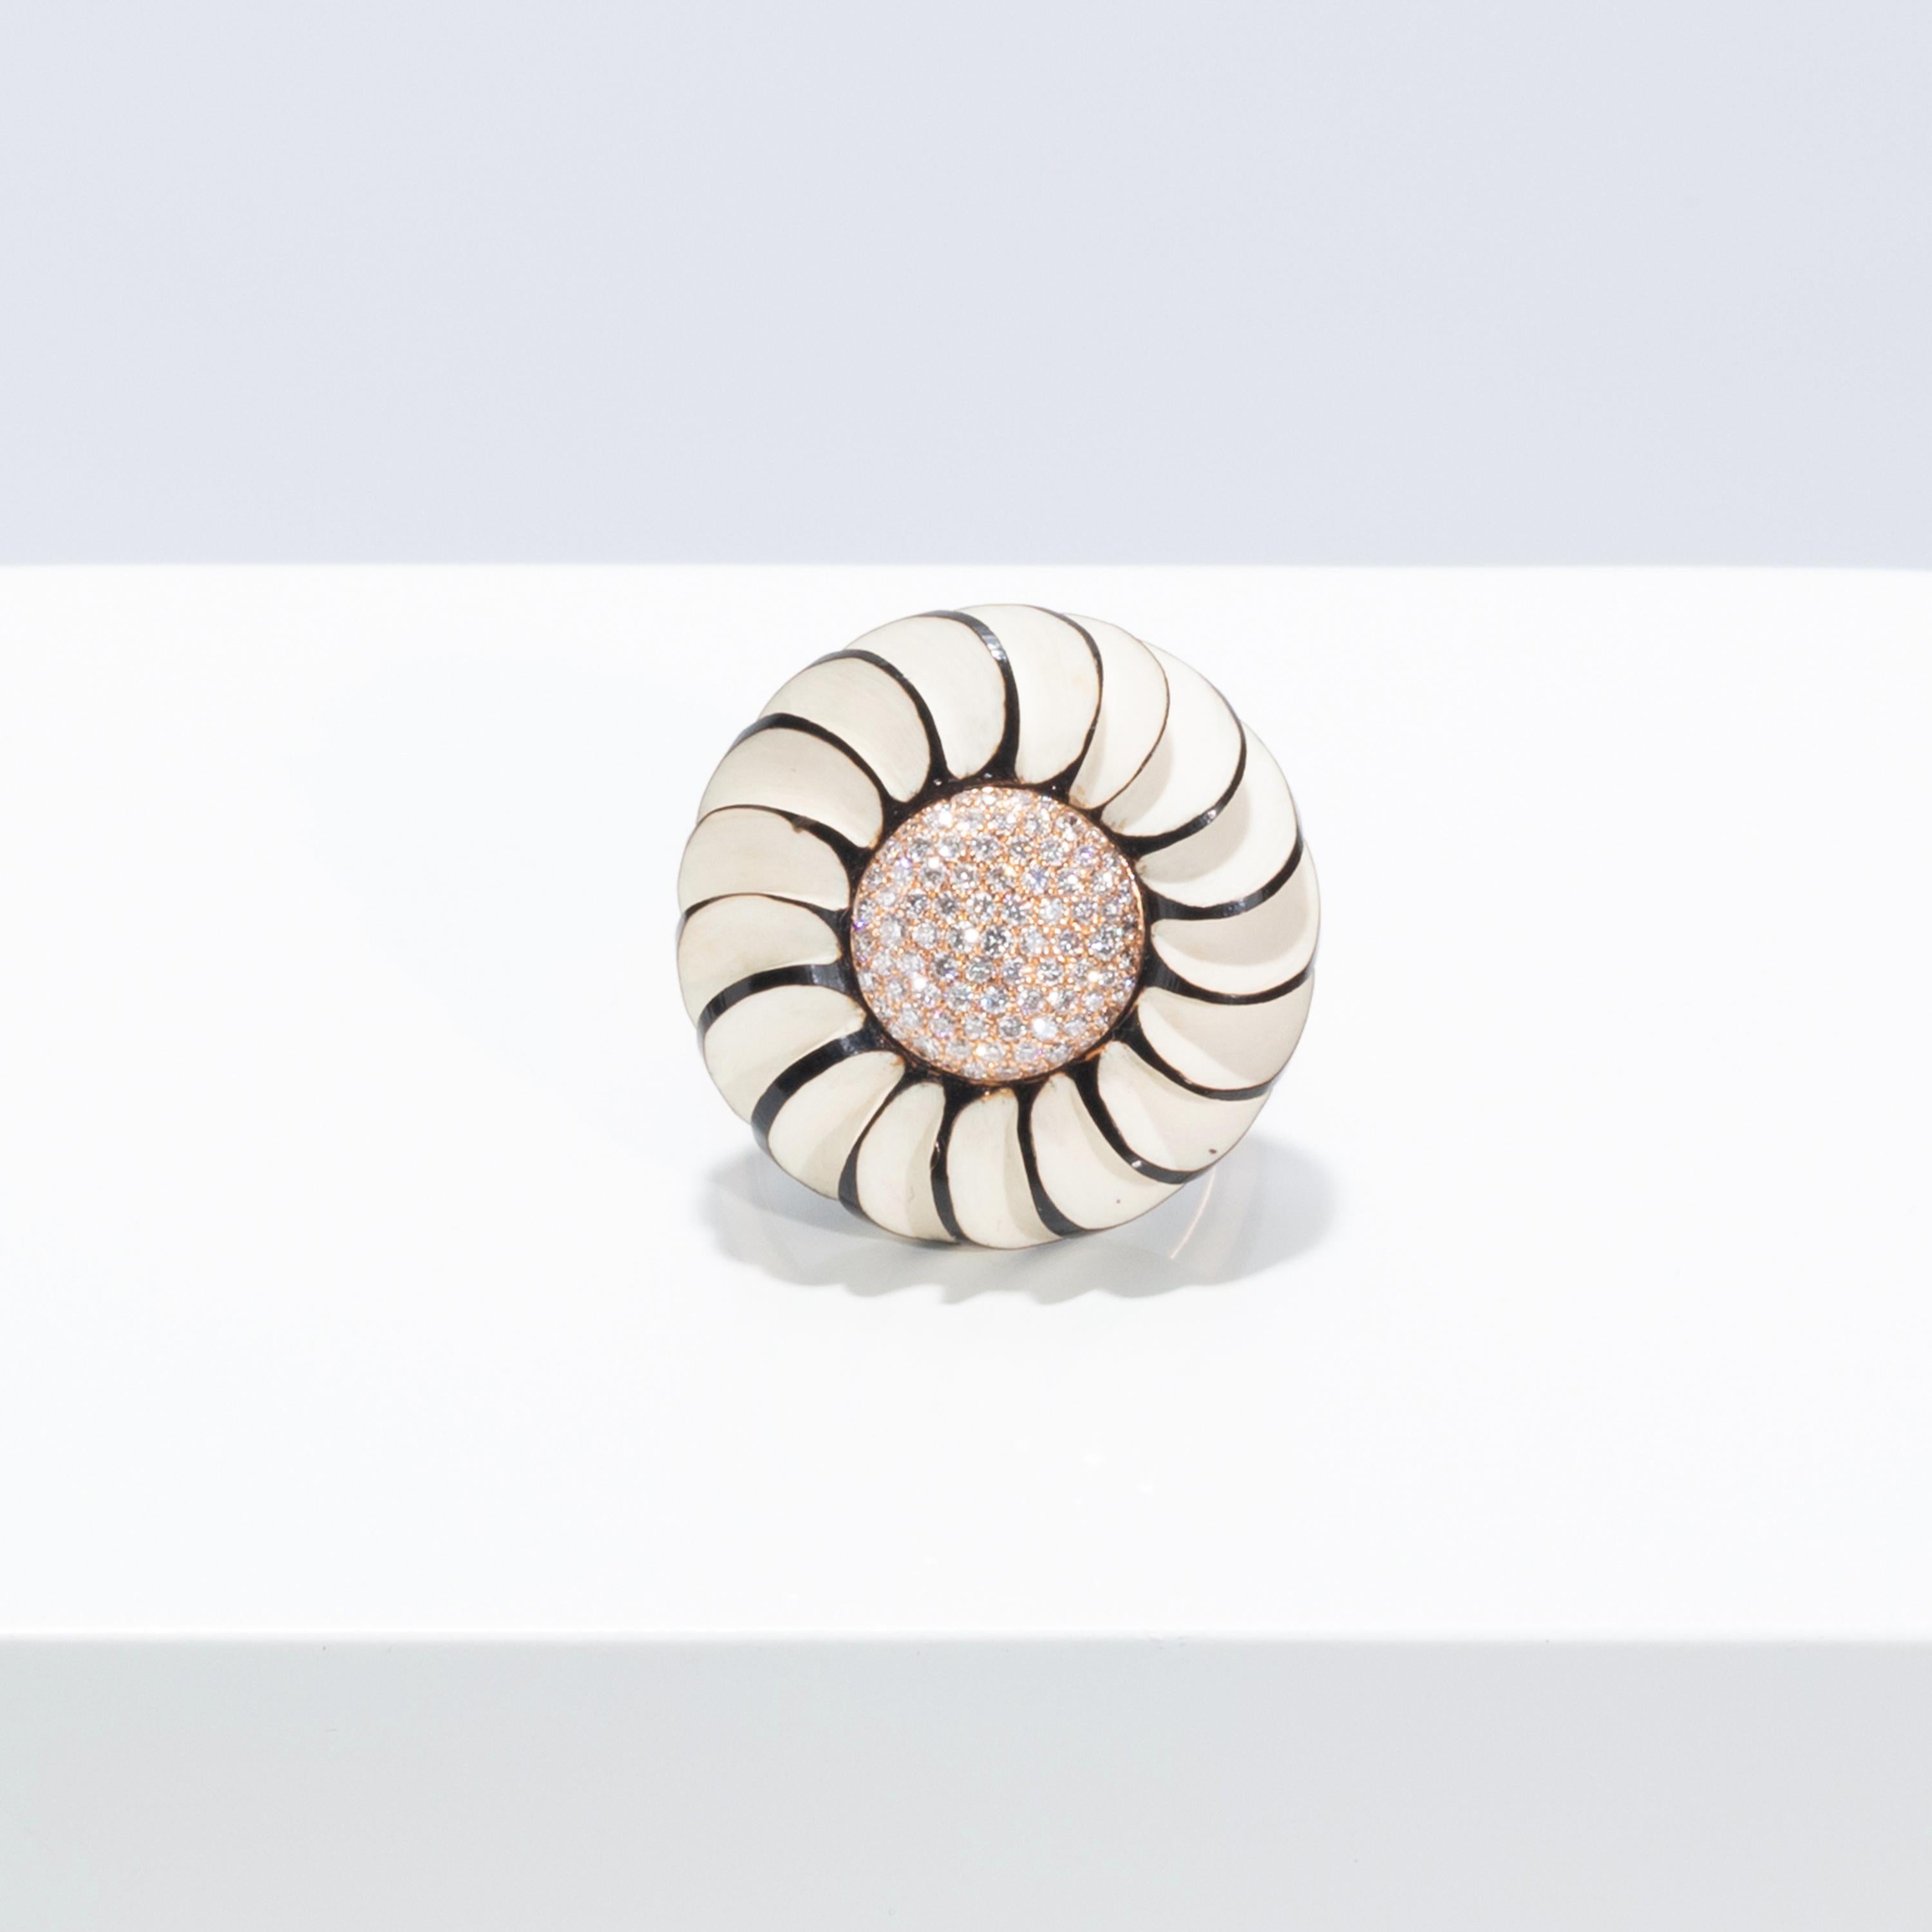 This one-of-a-kind ring is crafted from 18 Karat yellow gold (8 g), 0.45 carats of diamonds, and an Art Deco style black and cream celluloid button.

Ring size UK: M
Ring size EU: 52
Ring size US: 6.5


For many years, Francesca Villa was creative